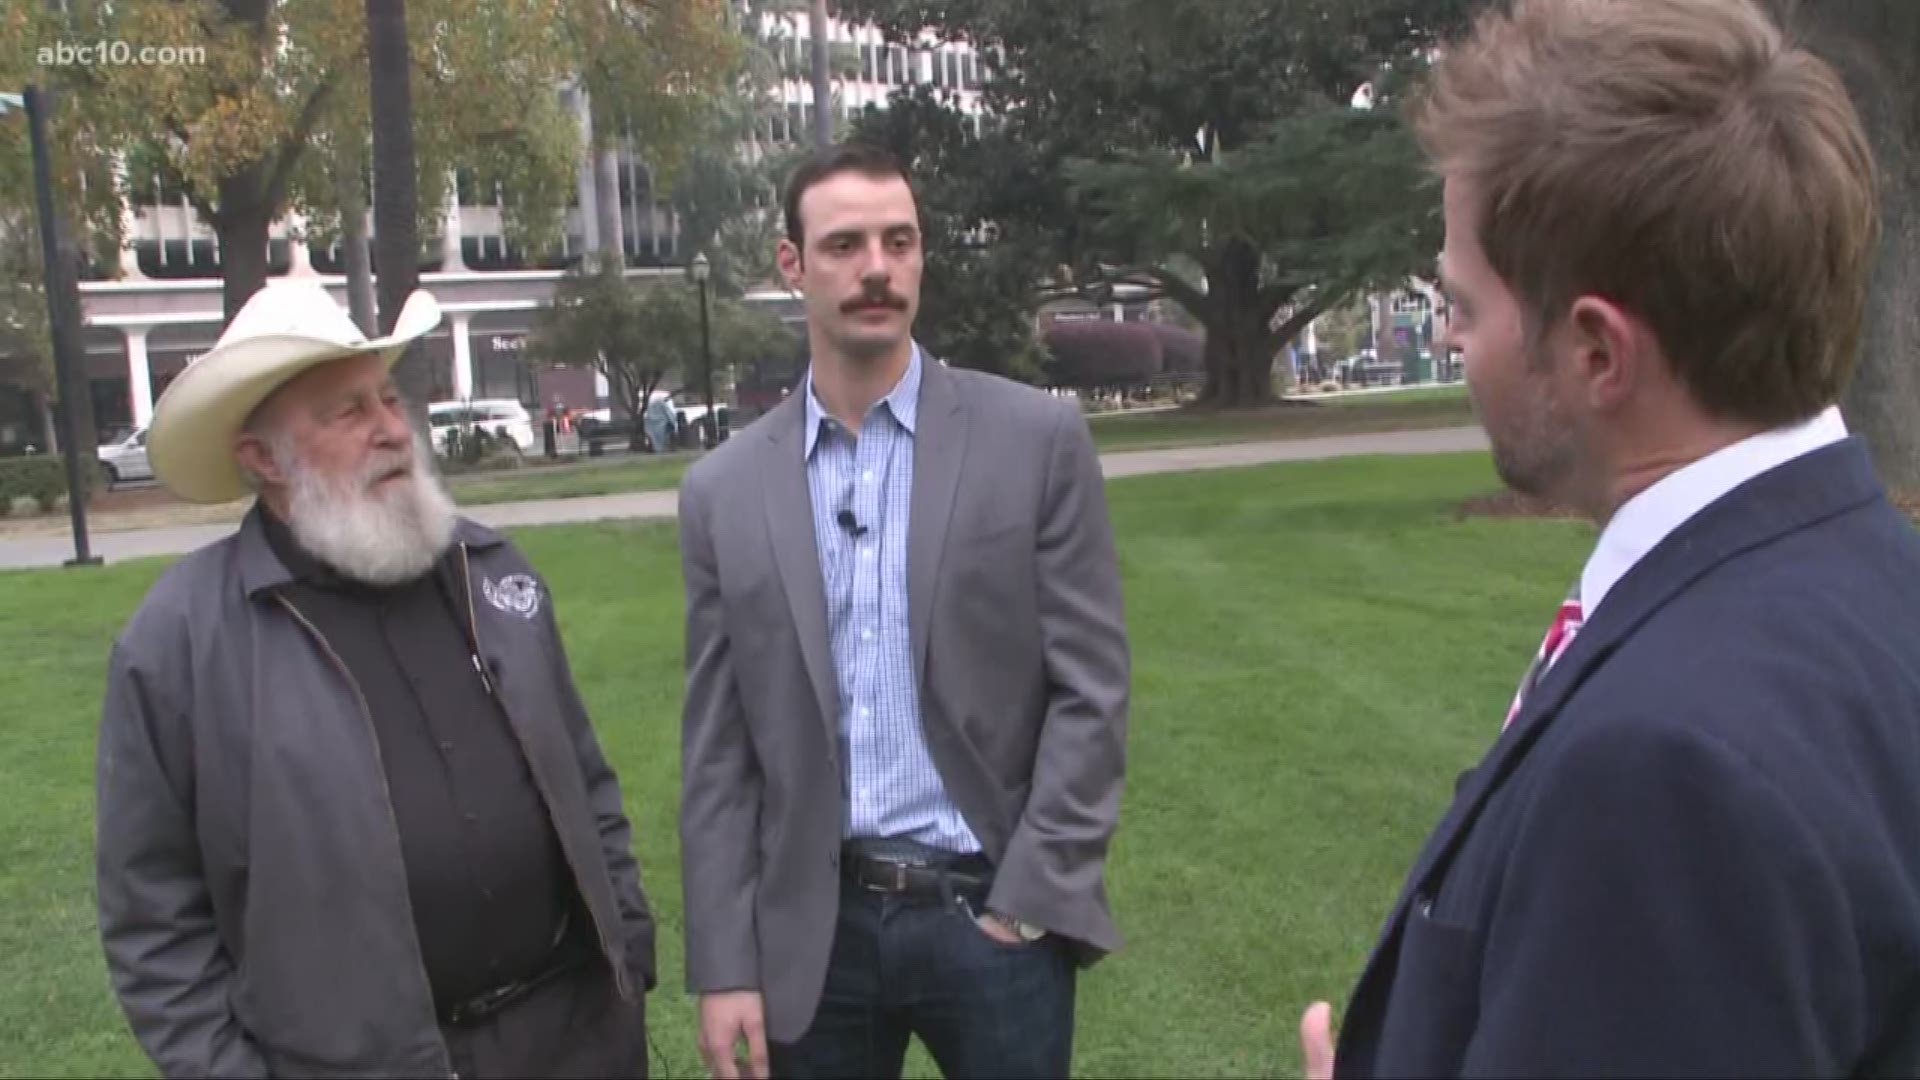 Rob Carlmark talks with Geo and his grandfather about the importance of the Movember movement.